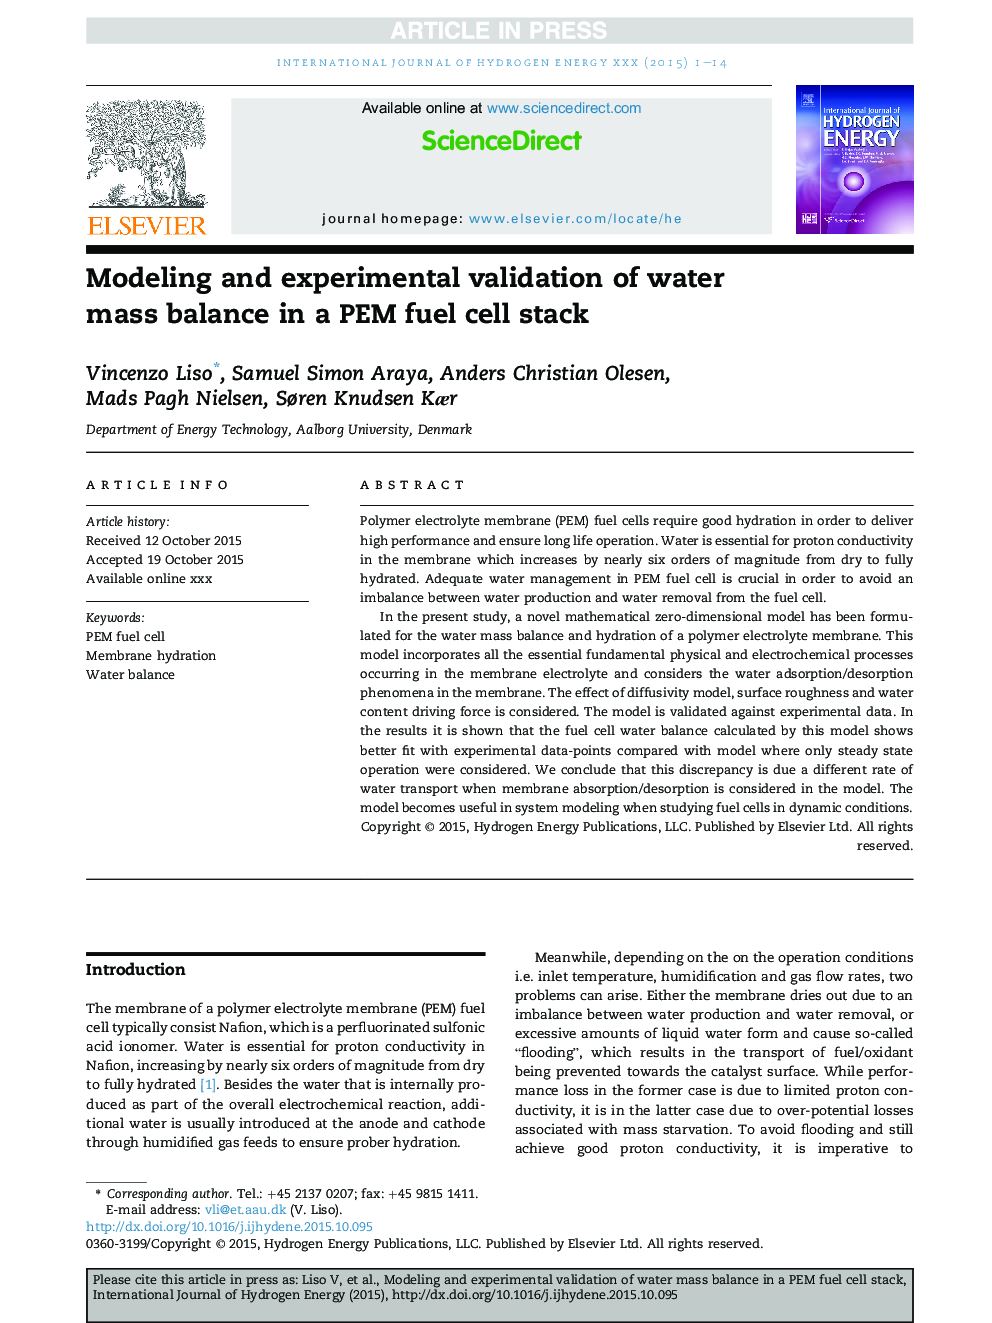 Modeling and experimental validation of water mass balance in a PEM fuel cell stack